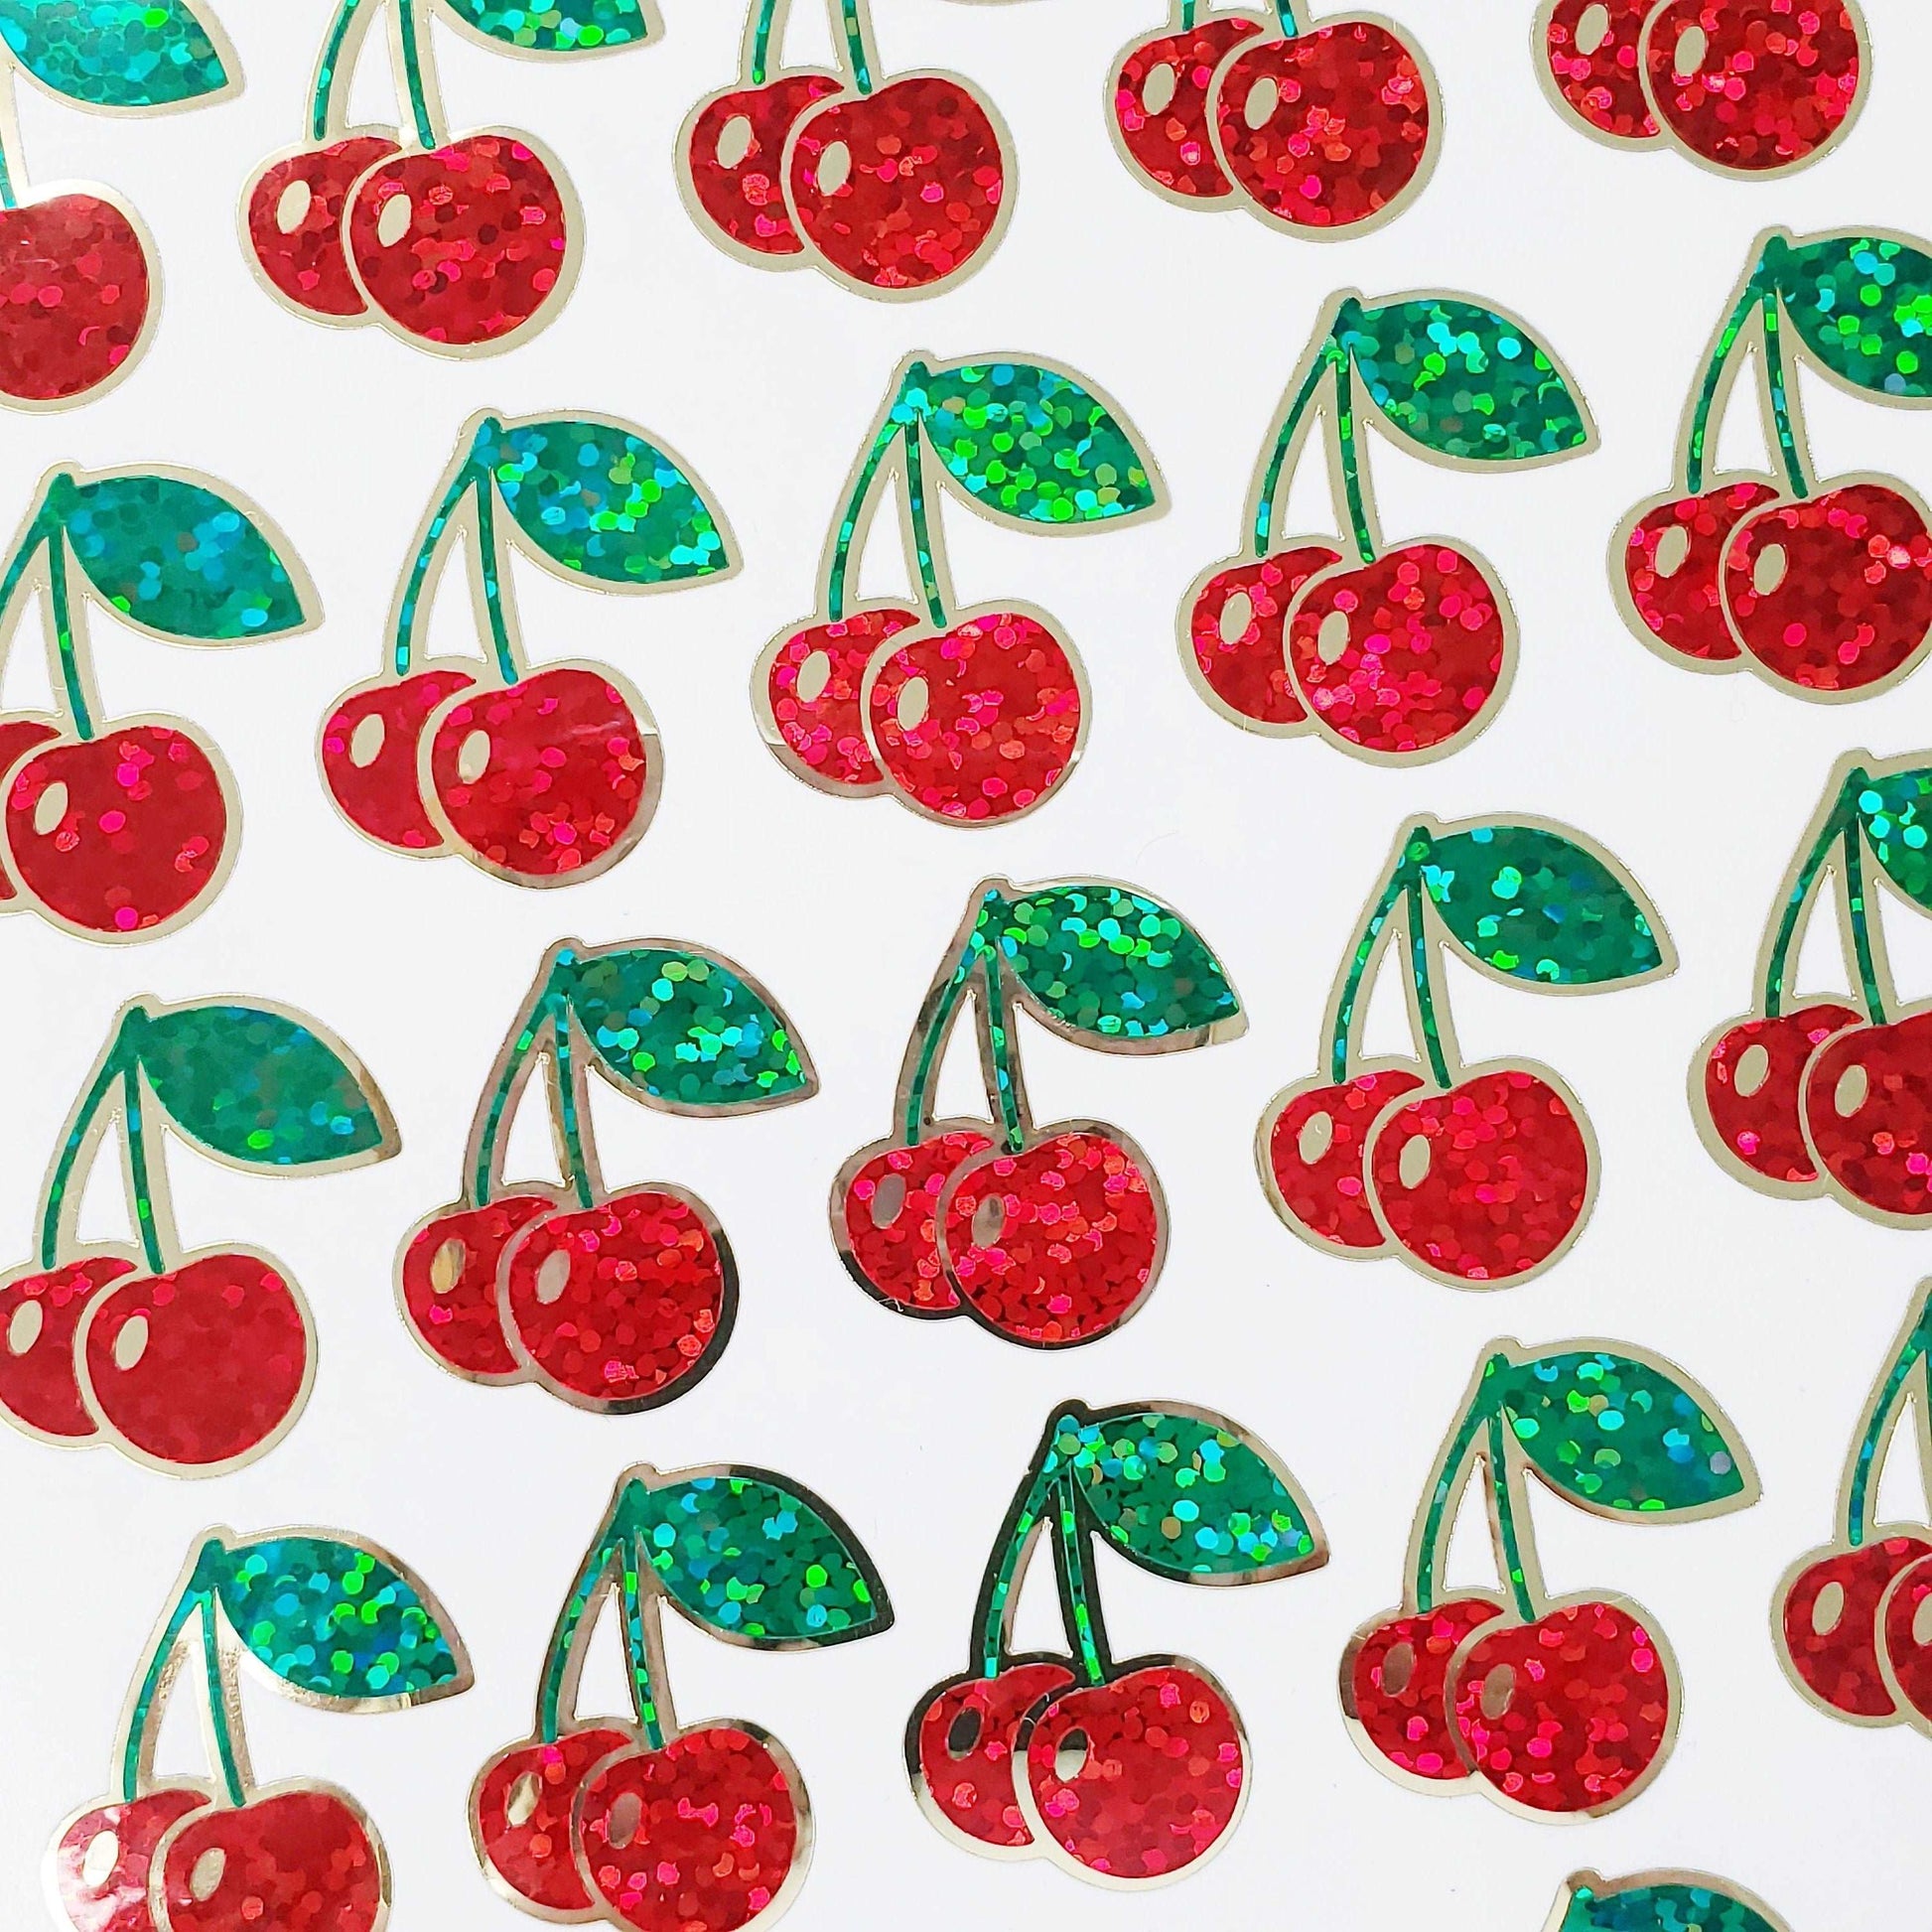 Cherry Sticker Sheet, set of 30 small sparkly retro style cherries, berry fruit stickers for laptops, scrapbook pages, journals, notebooks.